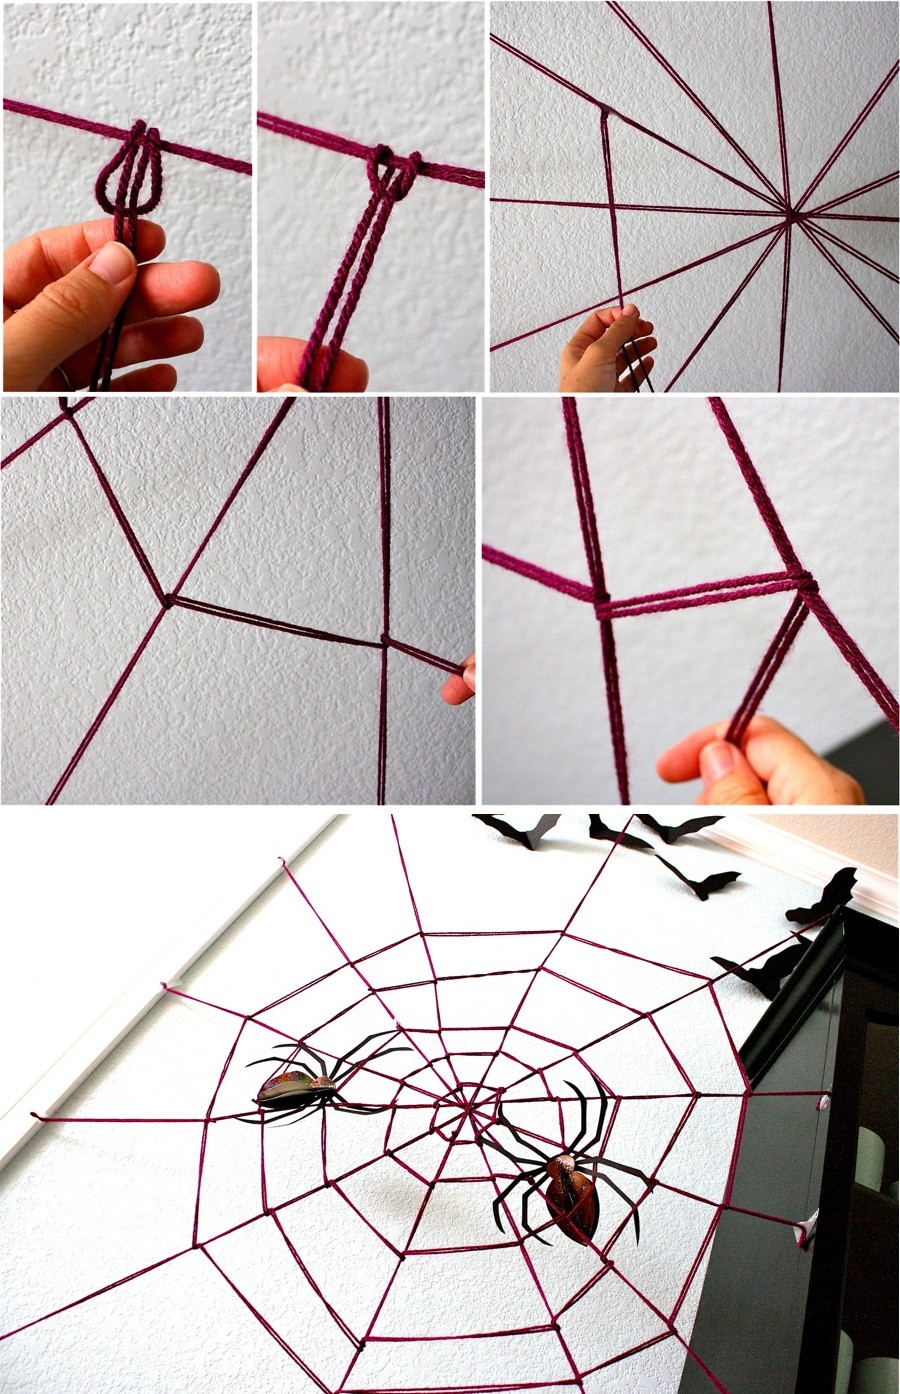 DIY Spider Web Decorations
 51 Cheap & Easy To Make DIY Halloween Decorations Ideas